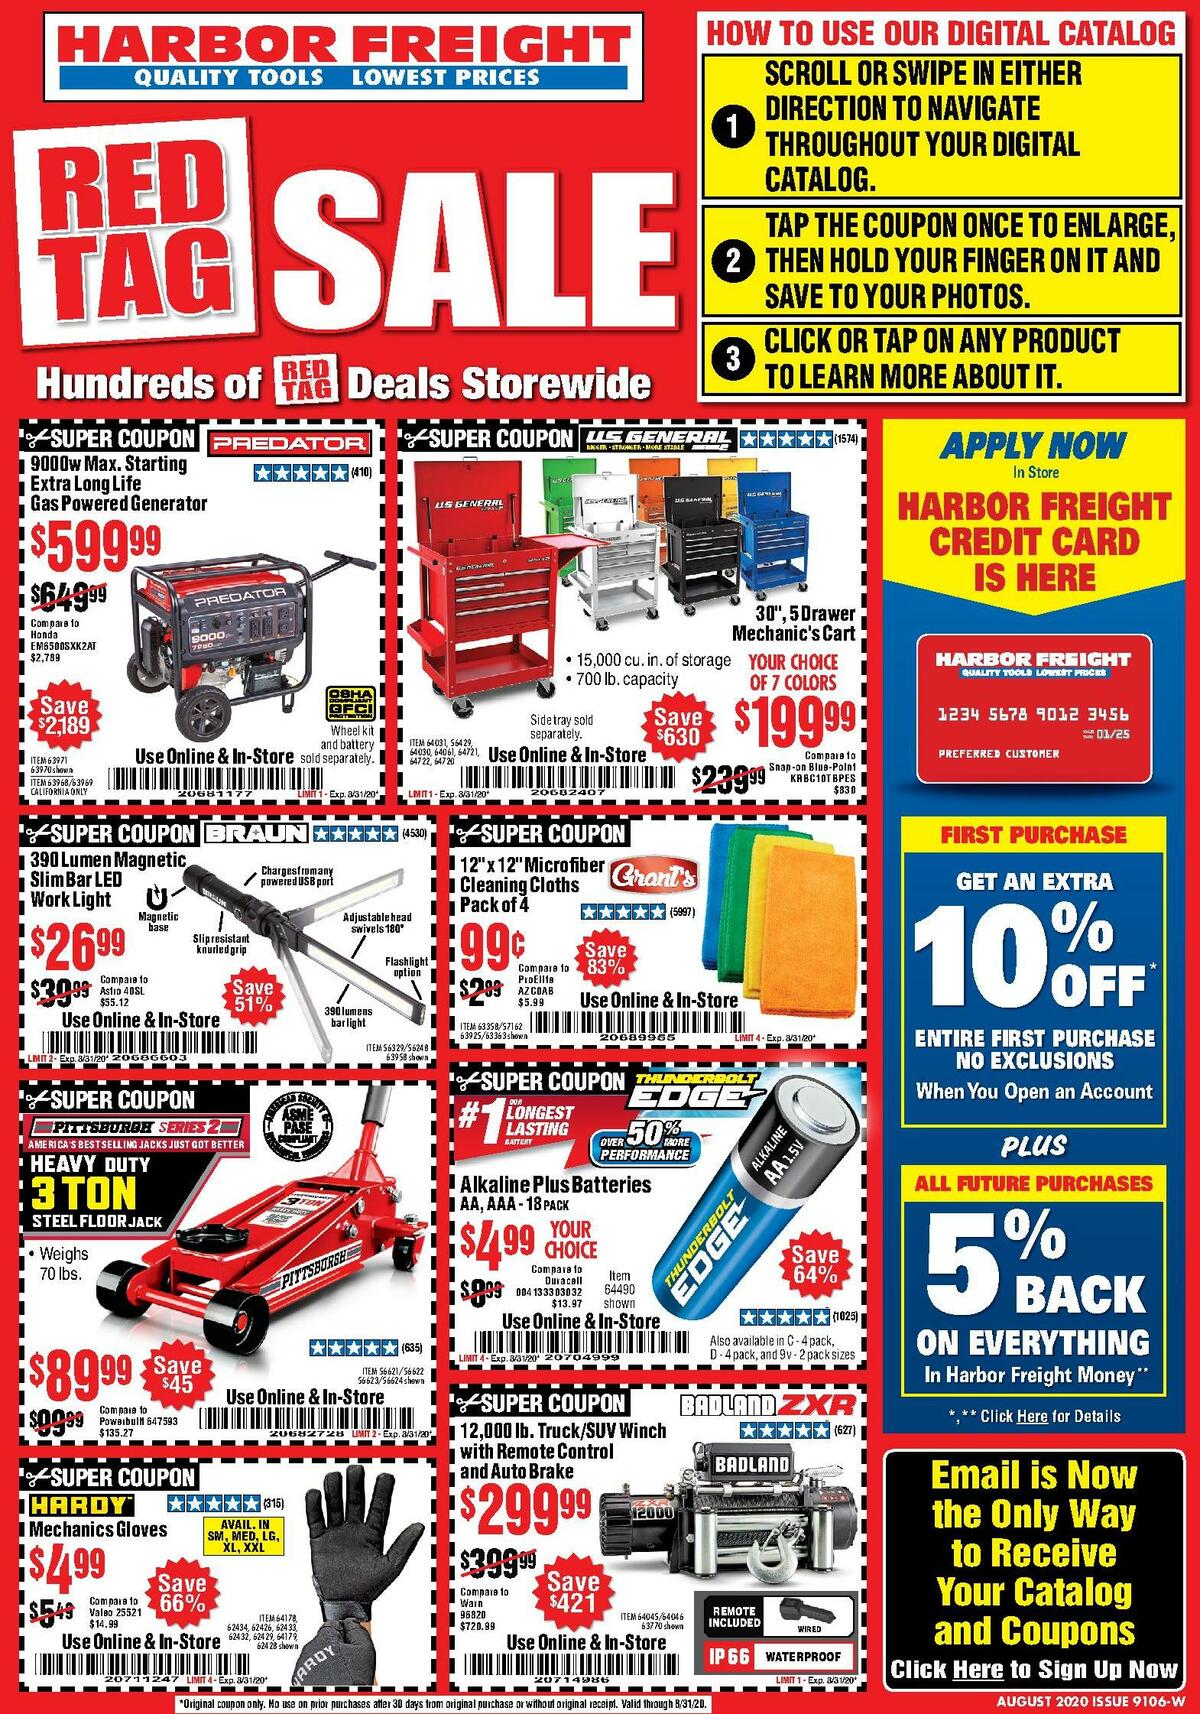 Harbor Freight Tools Best Offers & Special Buys from August 1